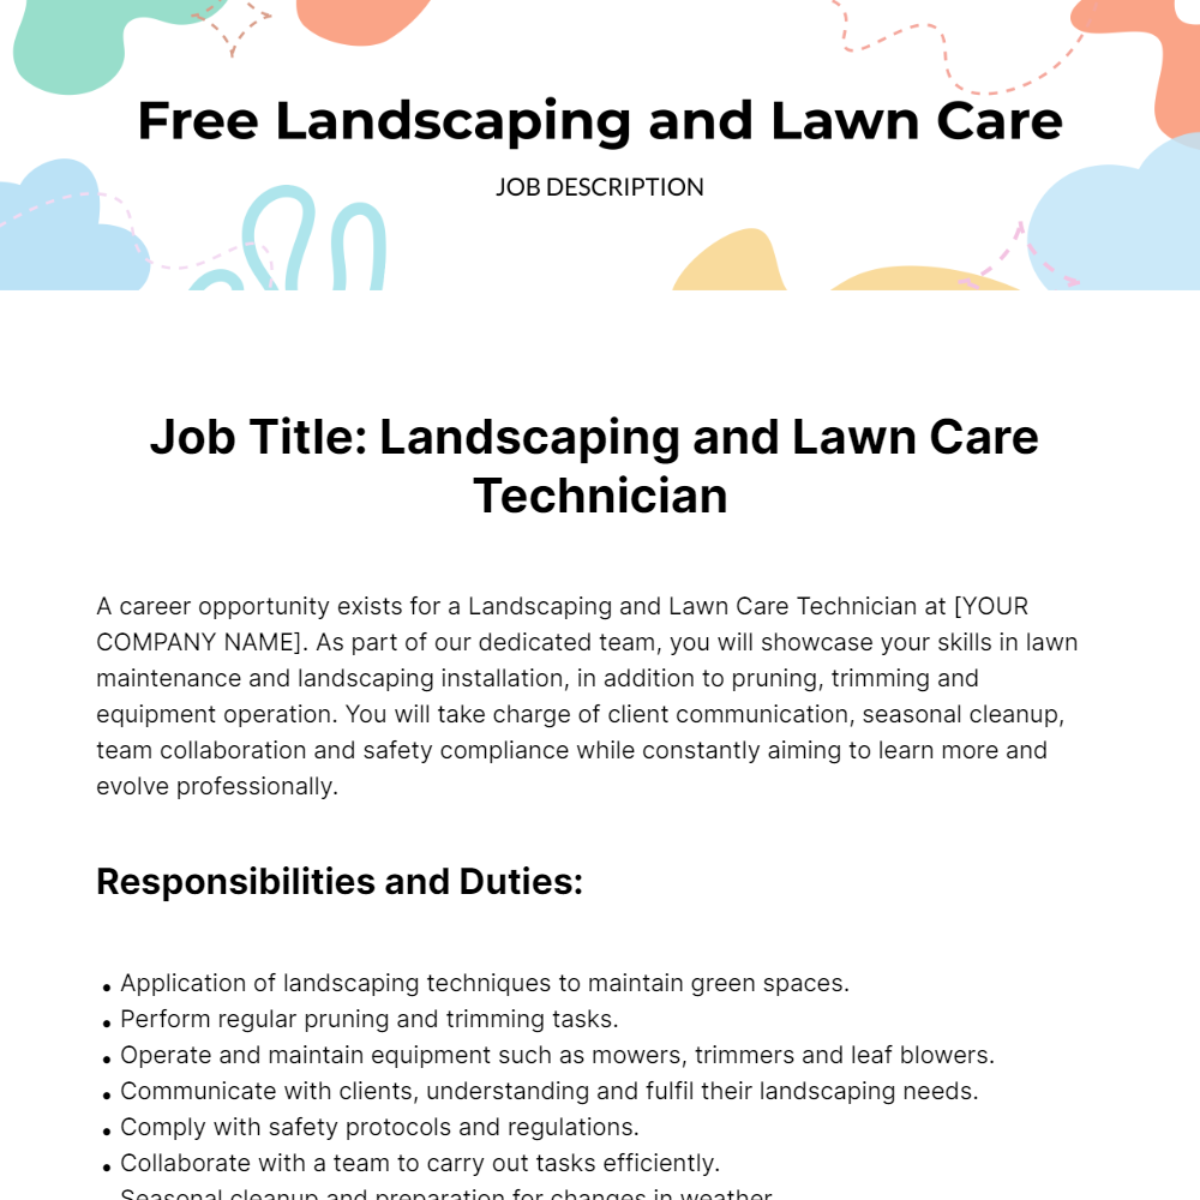 Free Landscaping and Lawn Care Job Description Template